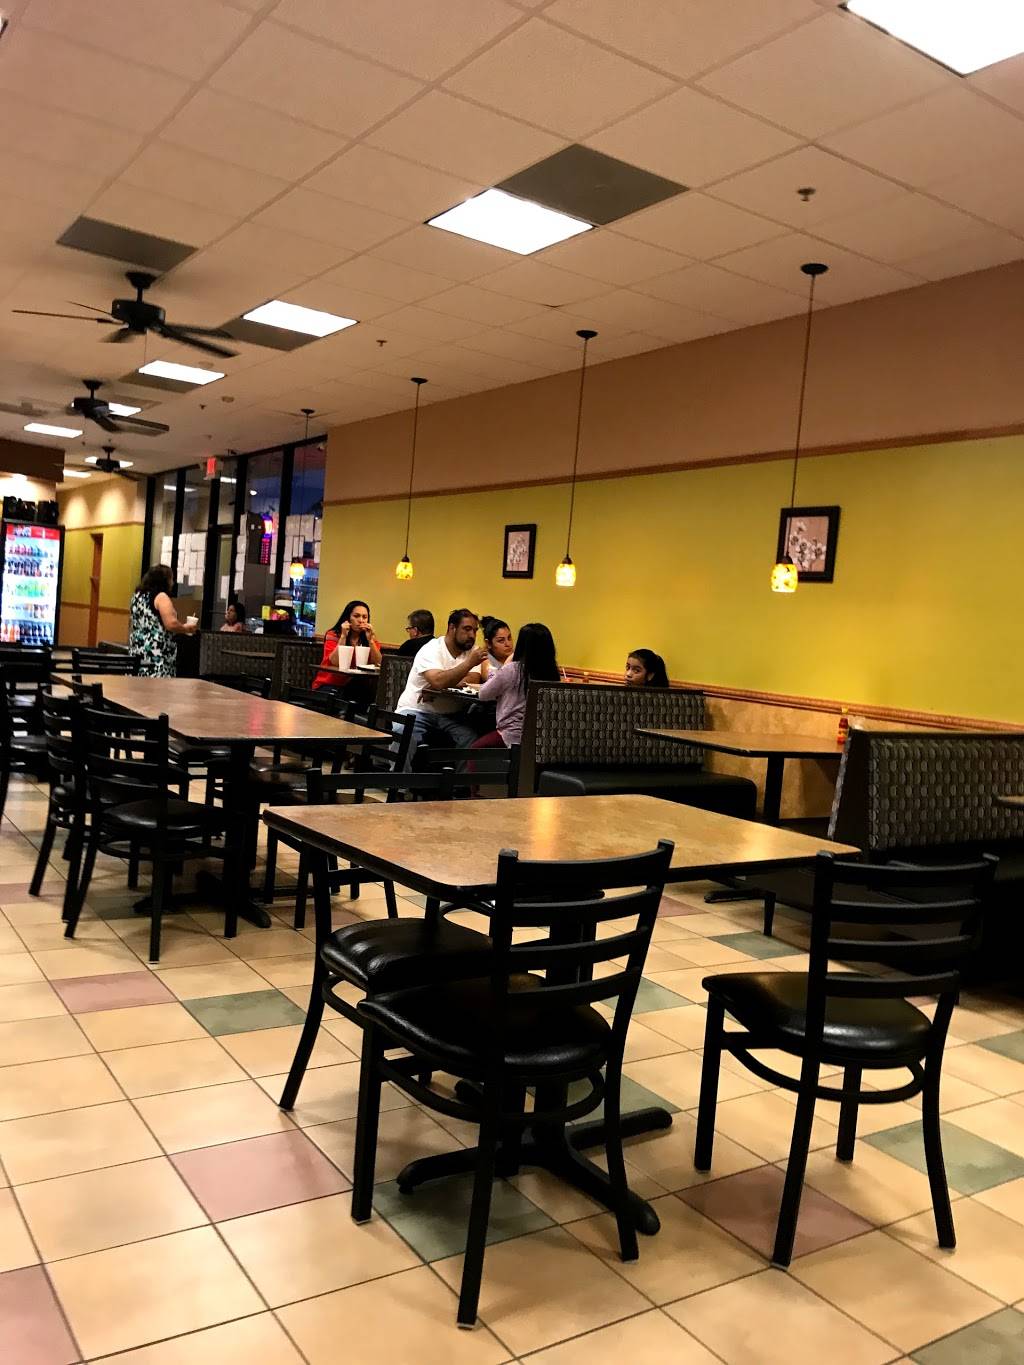 Magys Refresqueria | meal takeaway | 9990 Kleckley Dr, Houston, TX 77075, USA | 8326493259 OR +1 832-649-3259